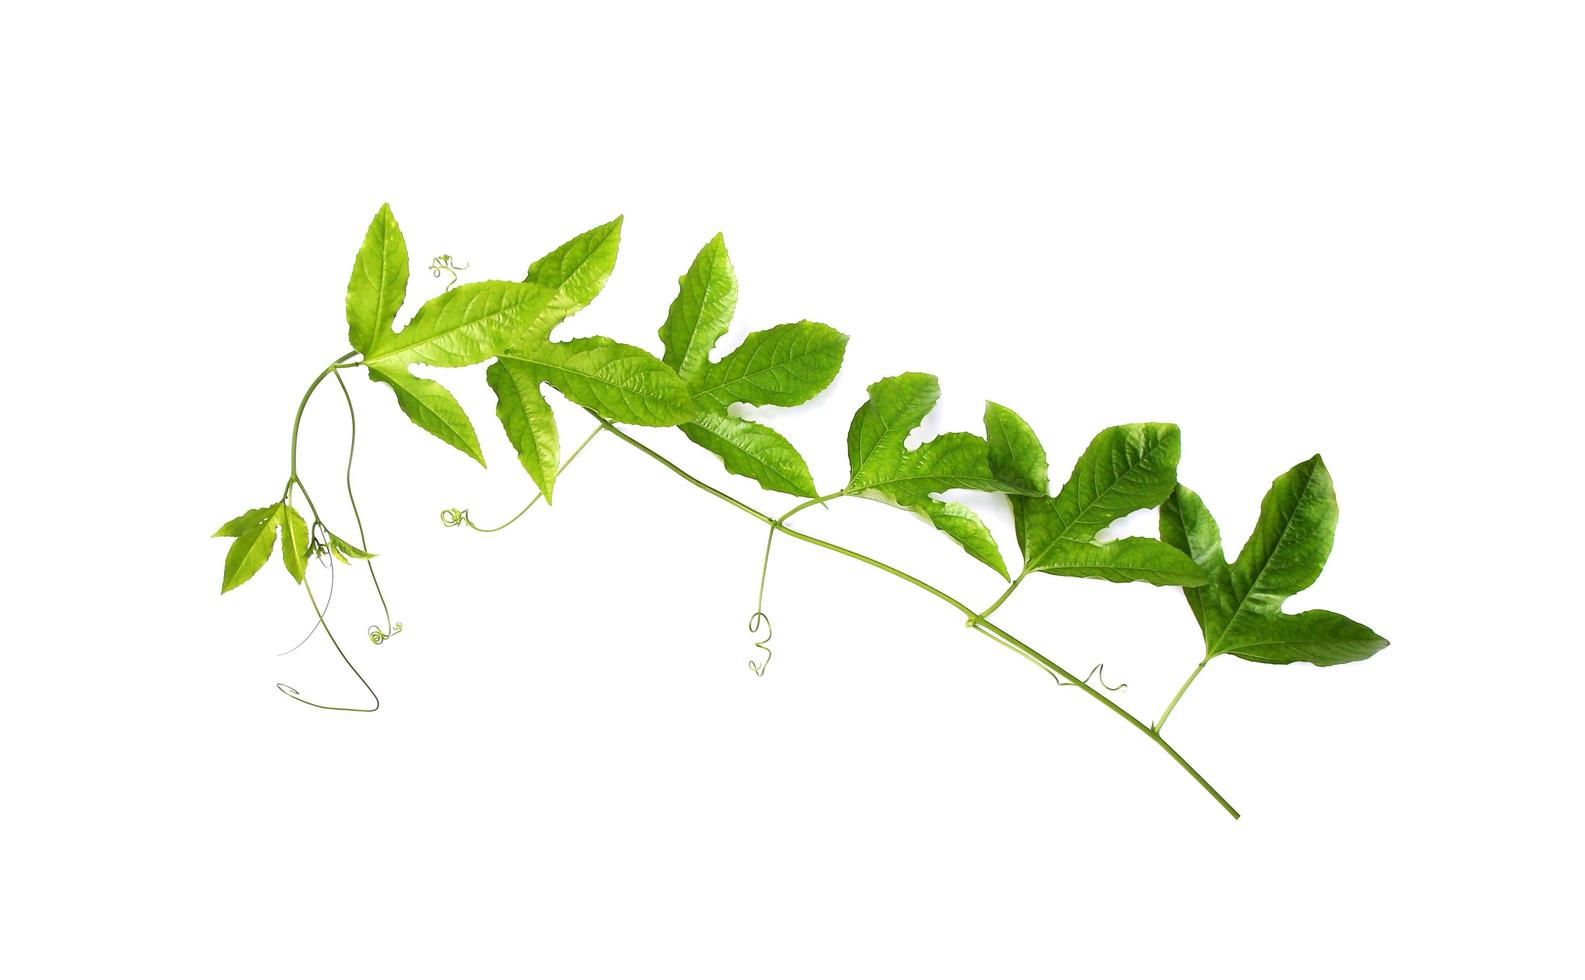 green leaf twisted climbing plant isolated on white background photo